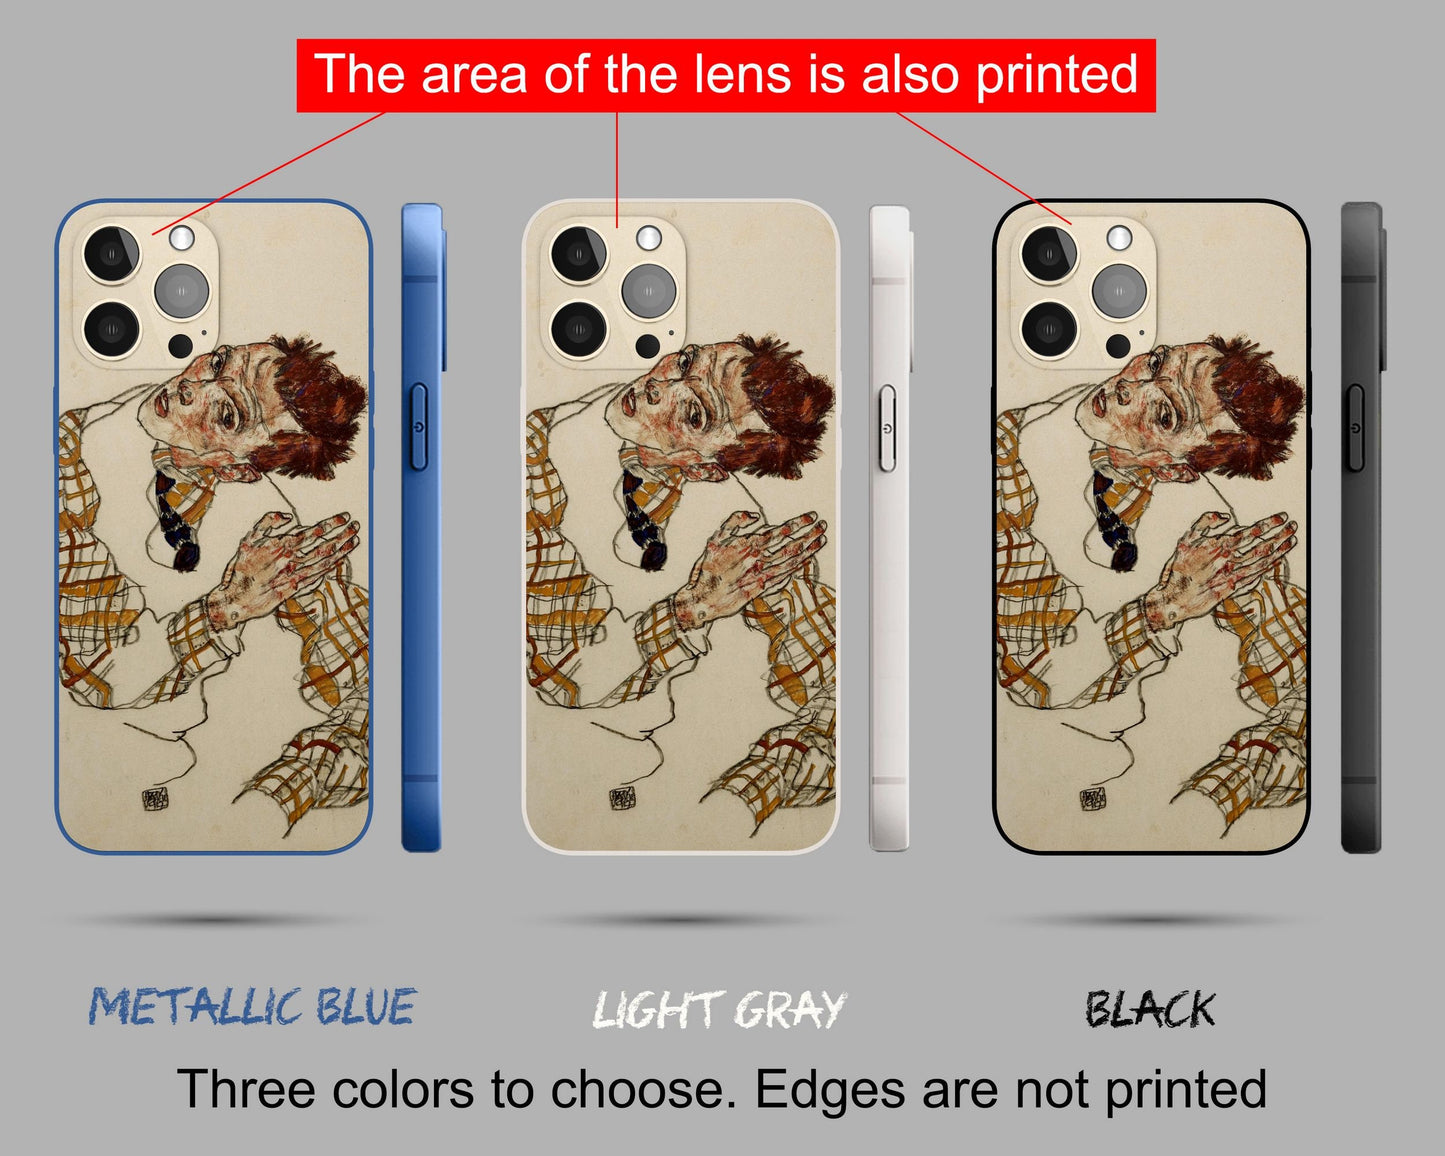 Iphone 14 Case Of Egon Schiele Famous Painting, Iphone Cover, Iphone 8 Plus Case, Iphone Xs Max, Aesthetic Iphone, Birthday Gift